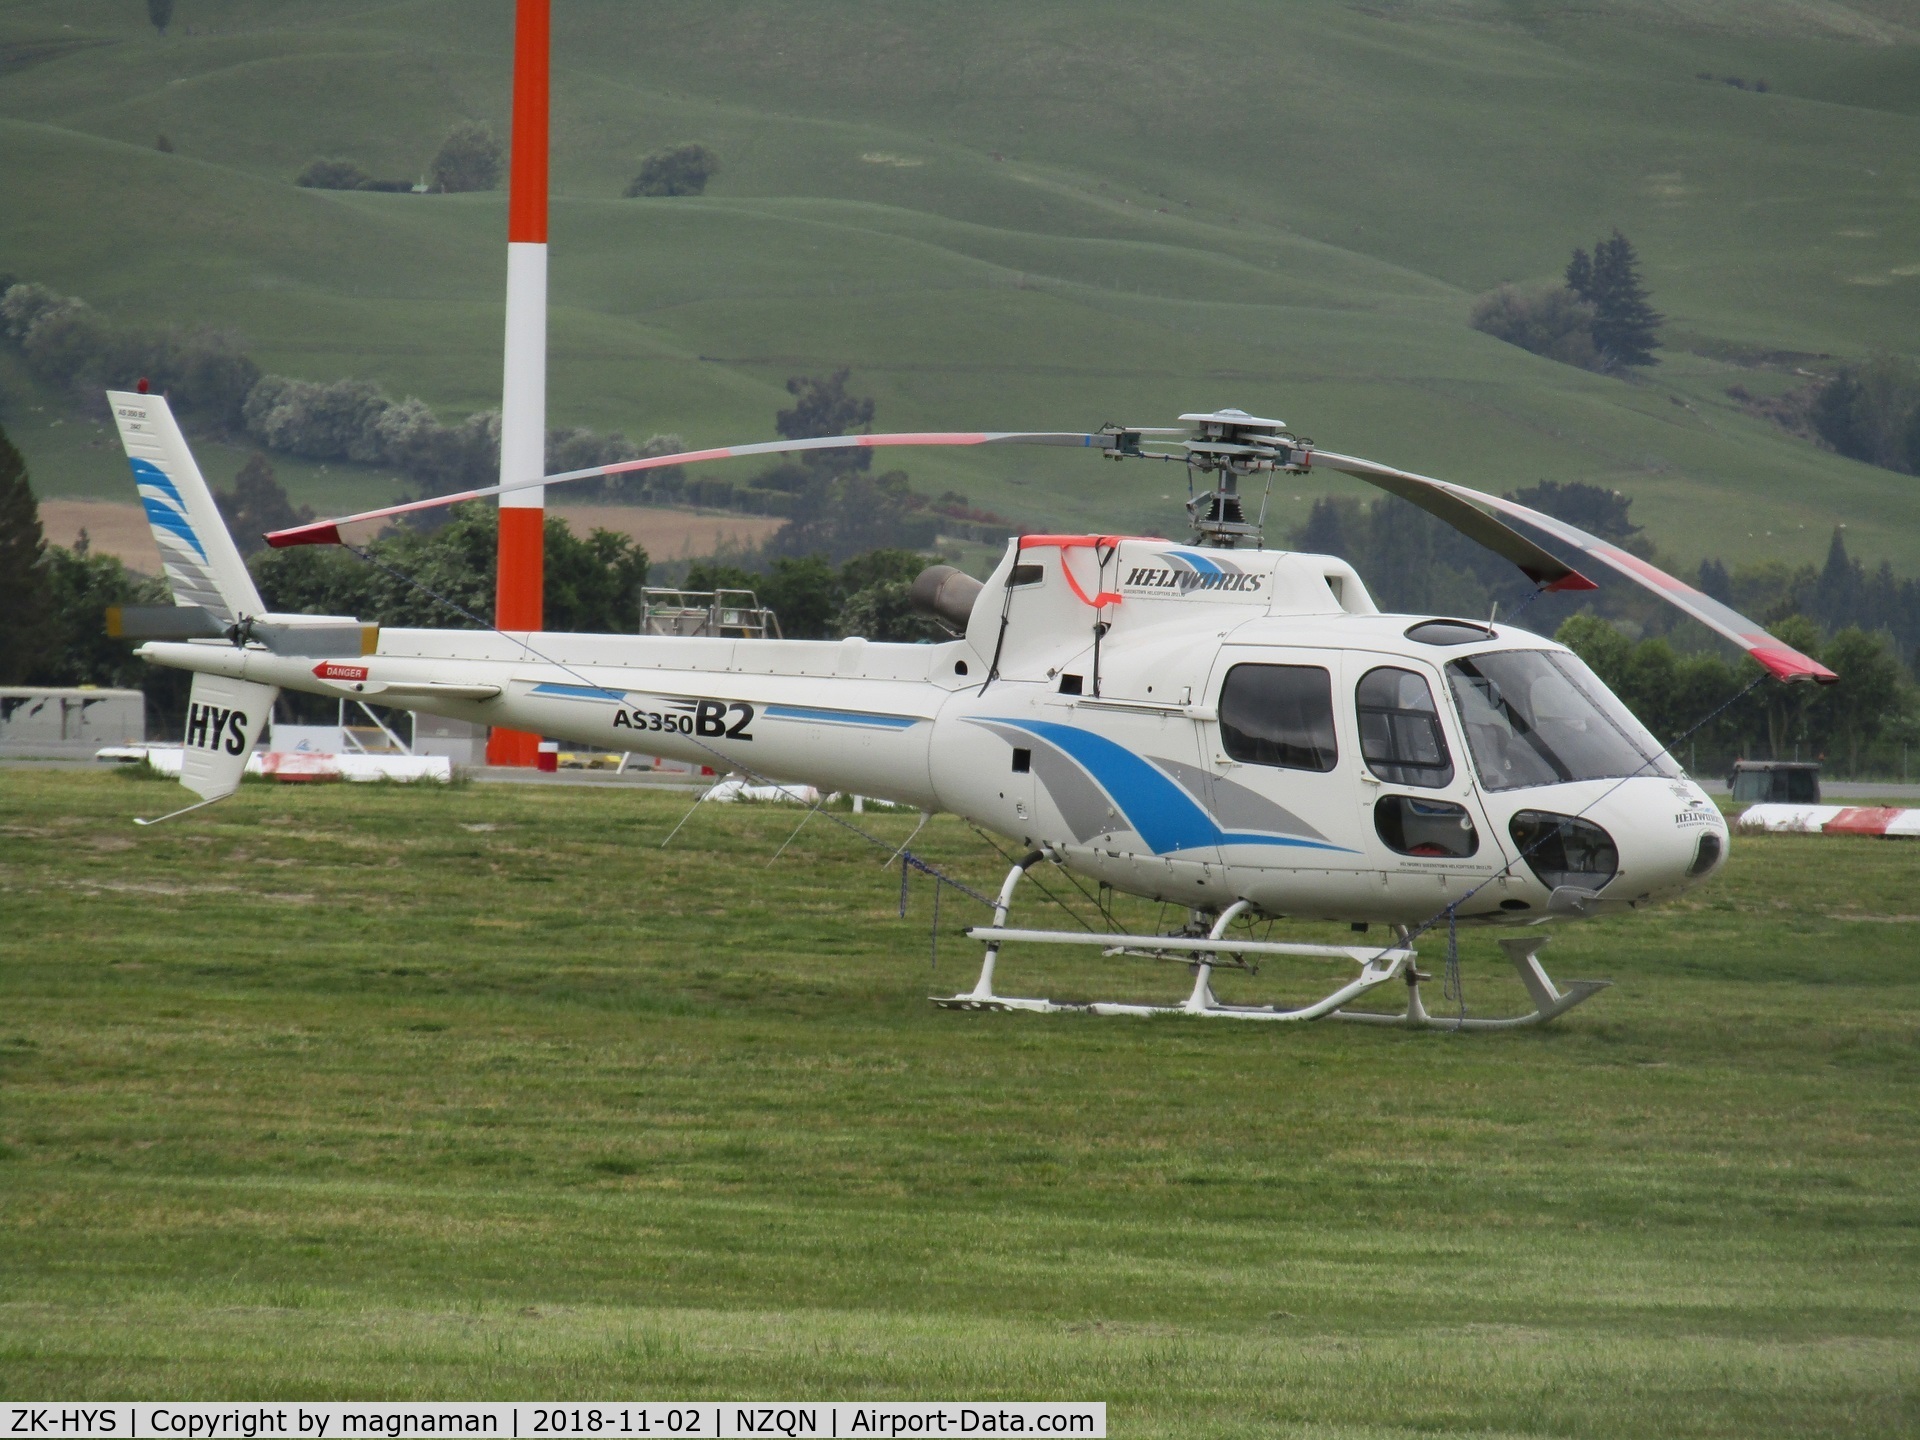 ZK-HYS, Aerospatiale AS-350B-2 Ecureuil C/N 2447, on grass outside hangar at queenstown